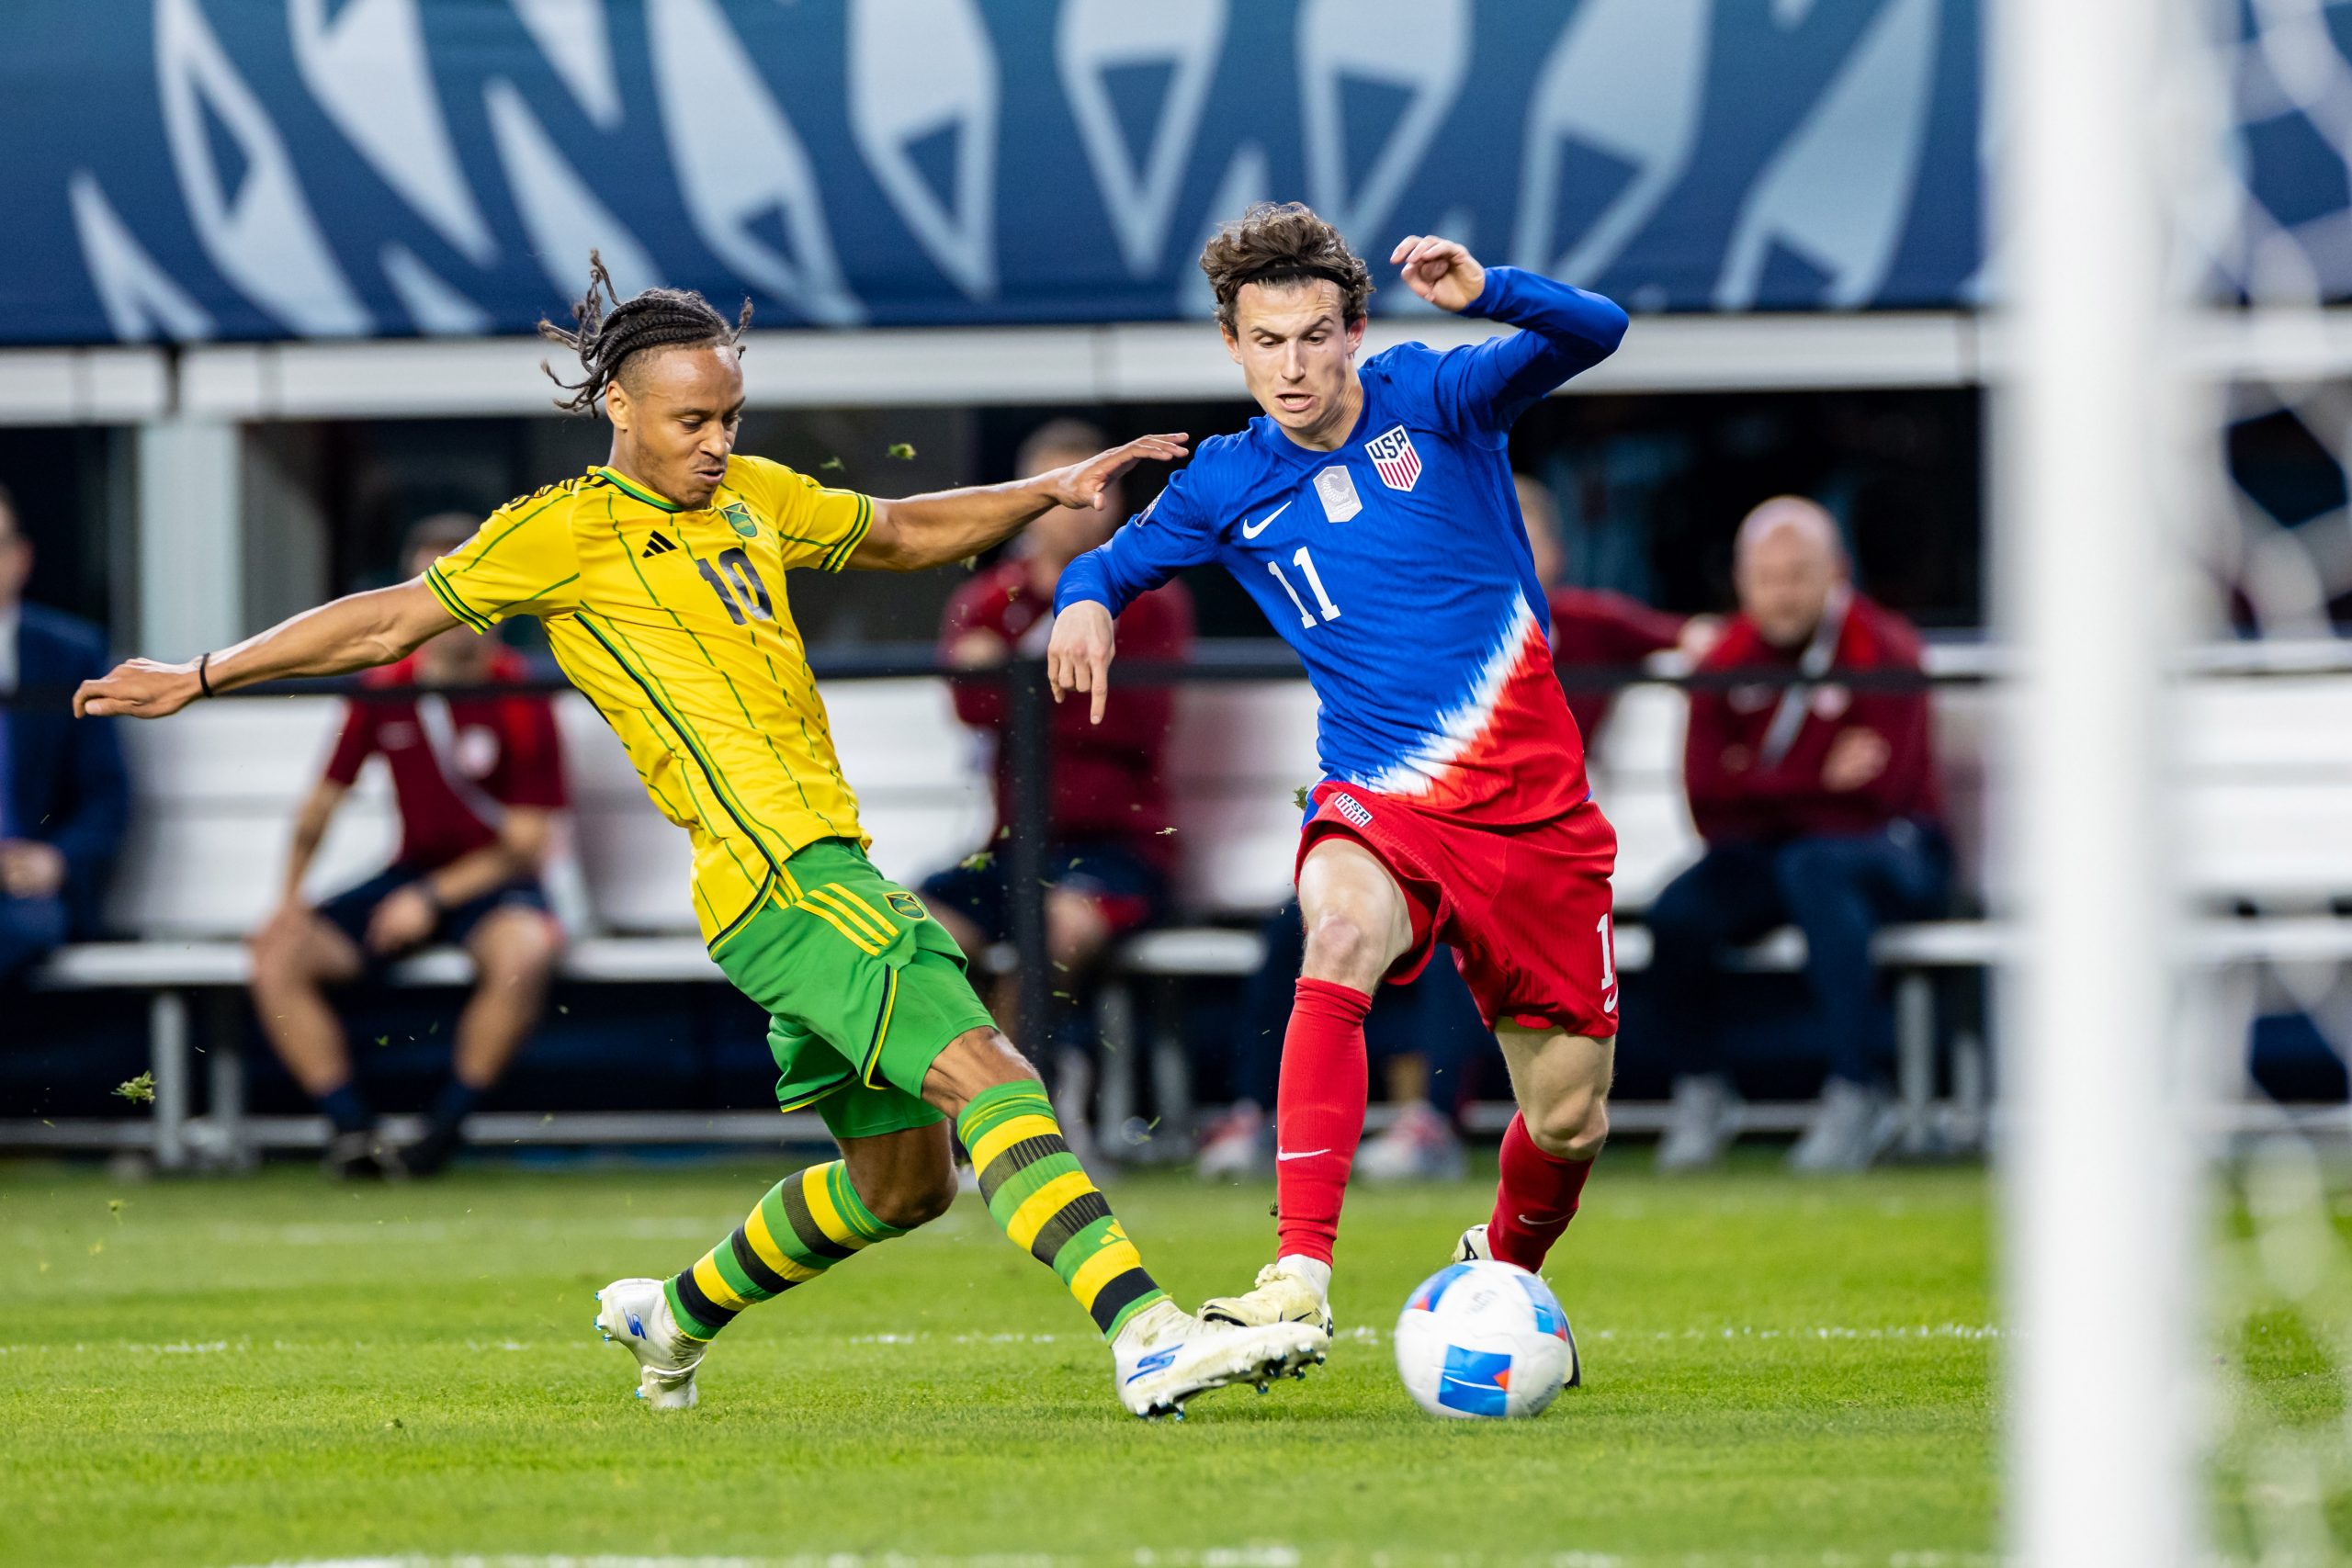 Brenden Aaronson tries to get past the defense as the US Men's National team knocks off Jamaica 3-1 in the Concacaf Nations League on March 21, 2024, at AT&T Stadium in Arlington, Texas. (Matt Visinsky, 3rd Degree)